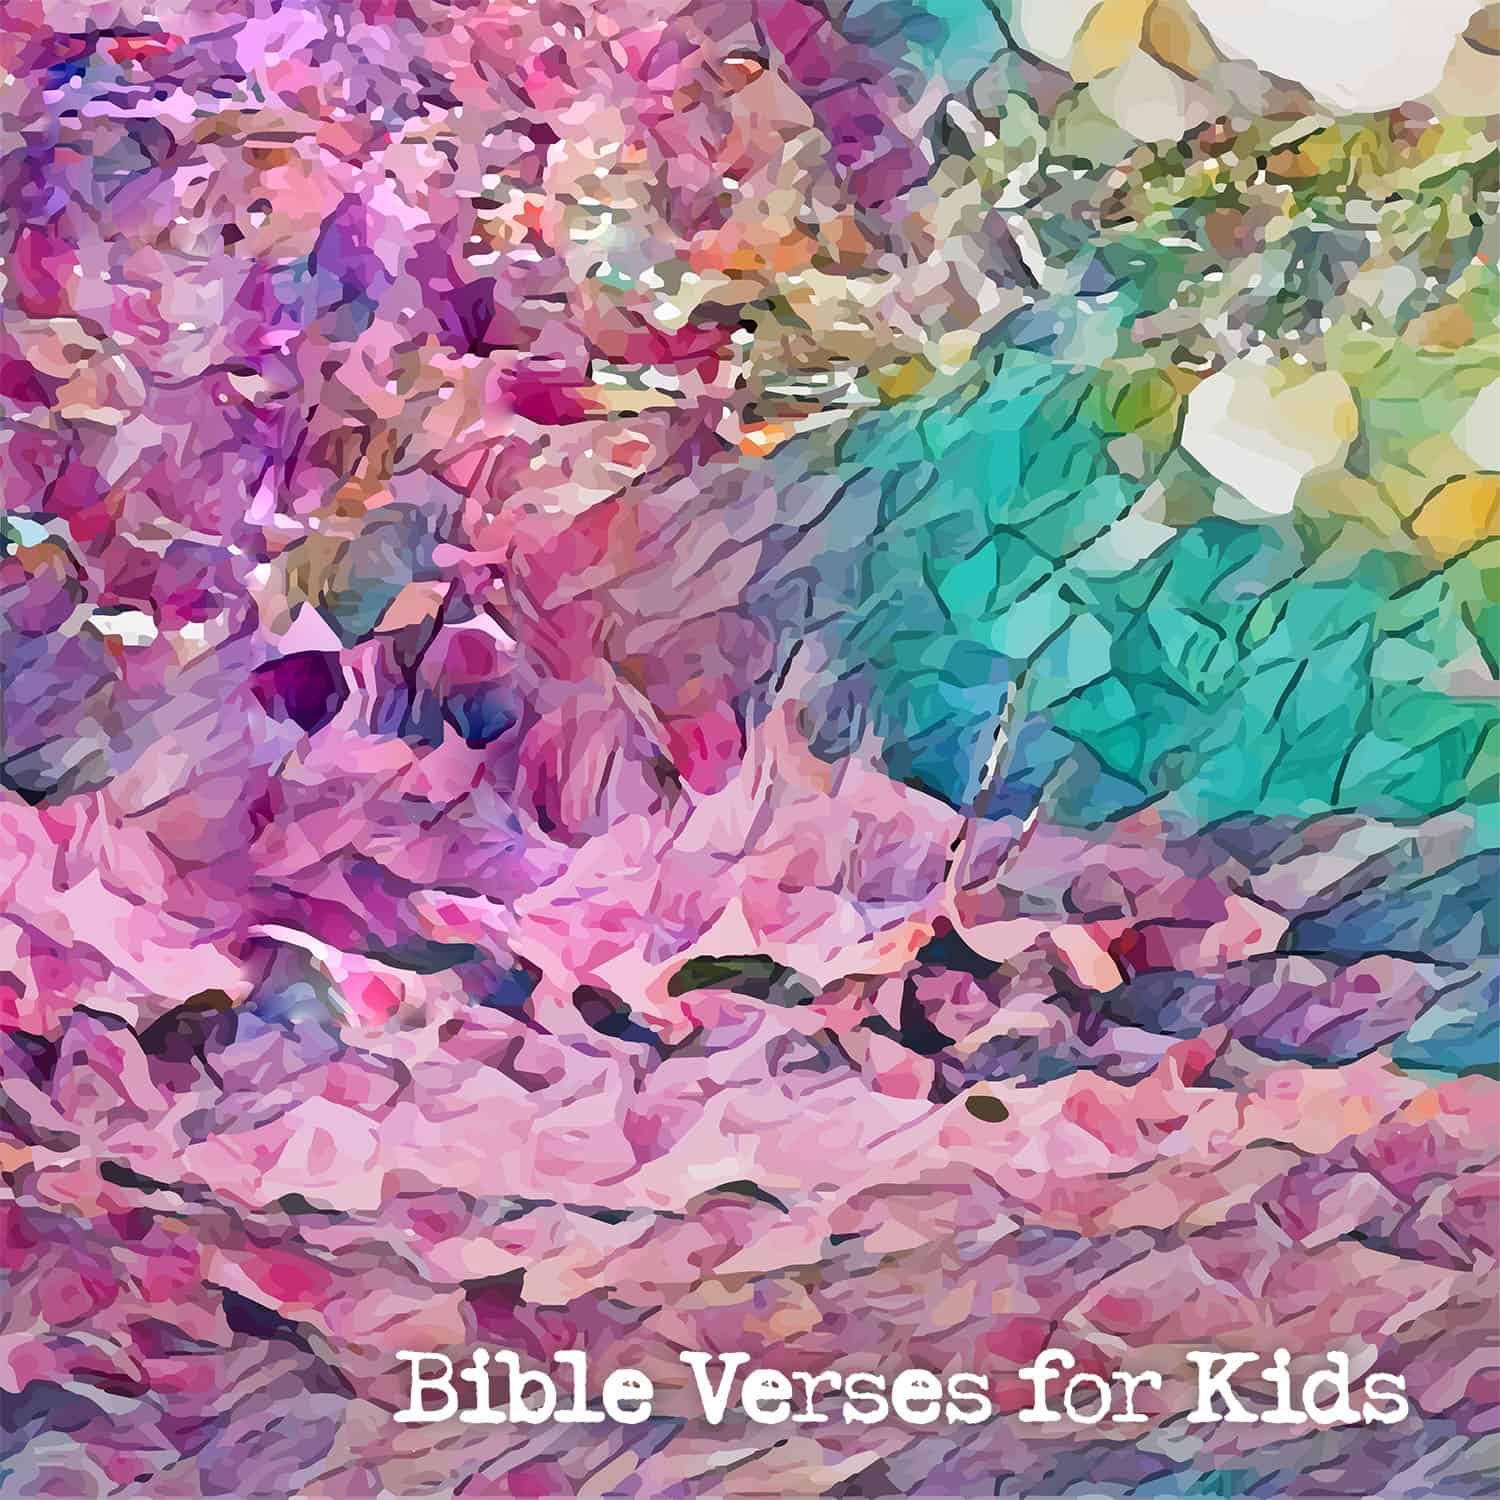 Bible Verses for Kids cover art